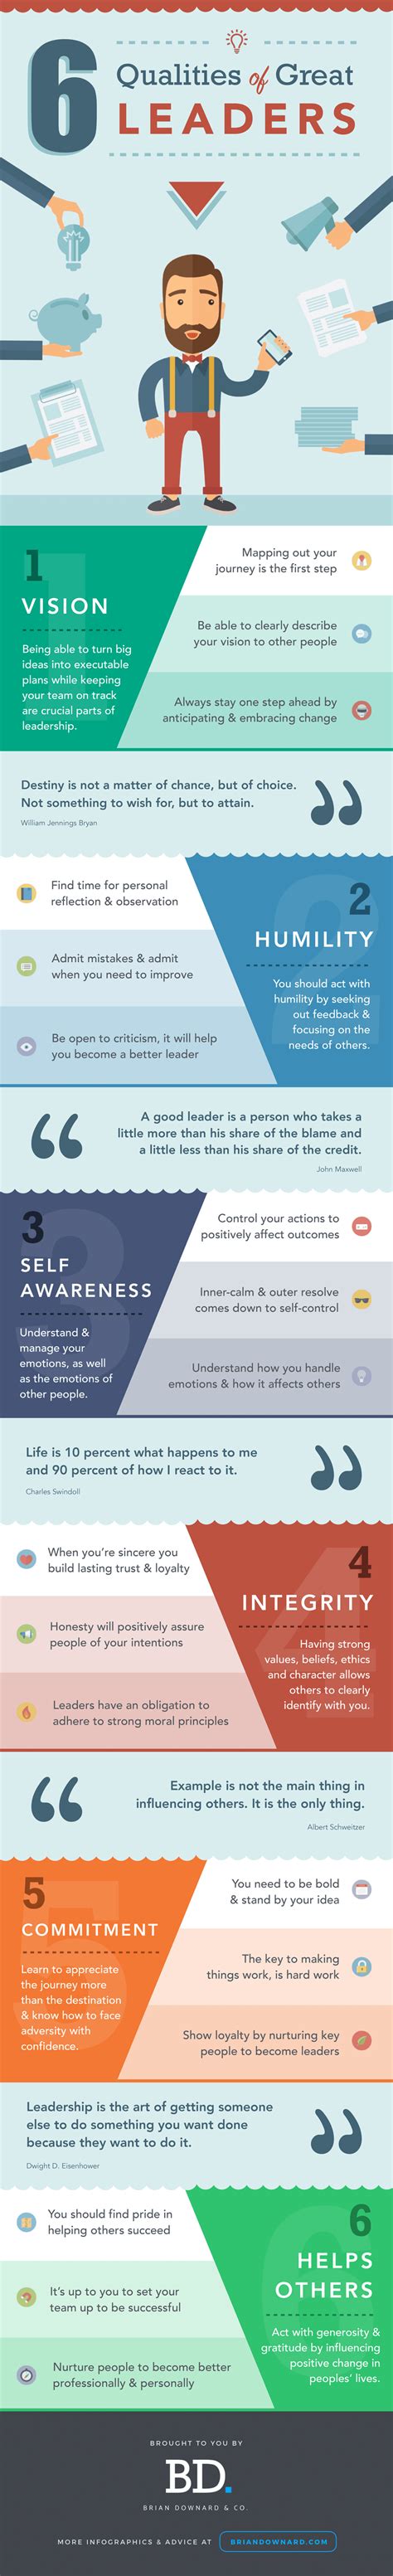 infographic 6 qualities of great leaders refresh leadership